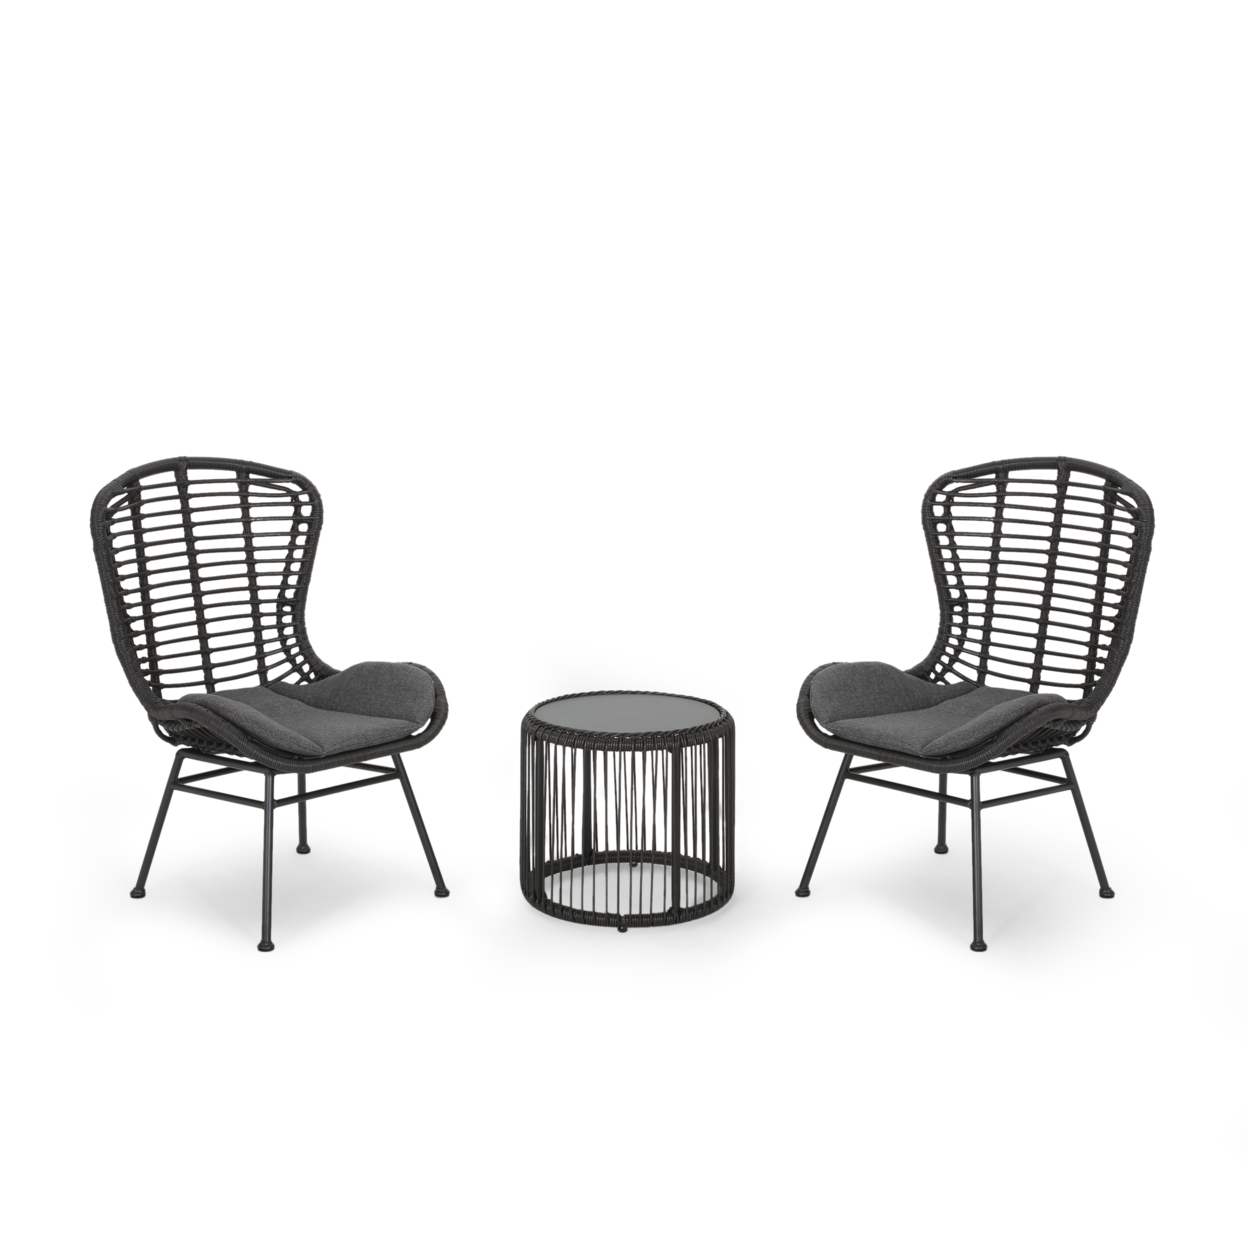 Daisy Outdoor Modern Boho 2 Seater Wicker Chat Set With Side Table - Gray + Black + Dark Gray